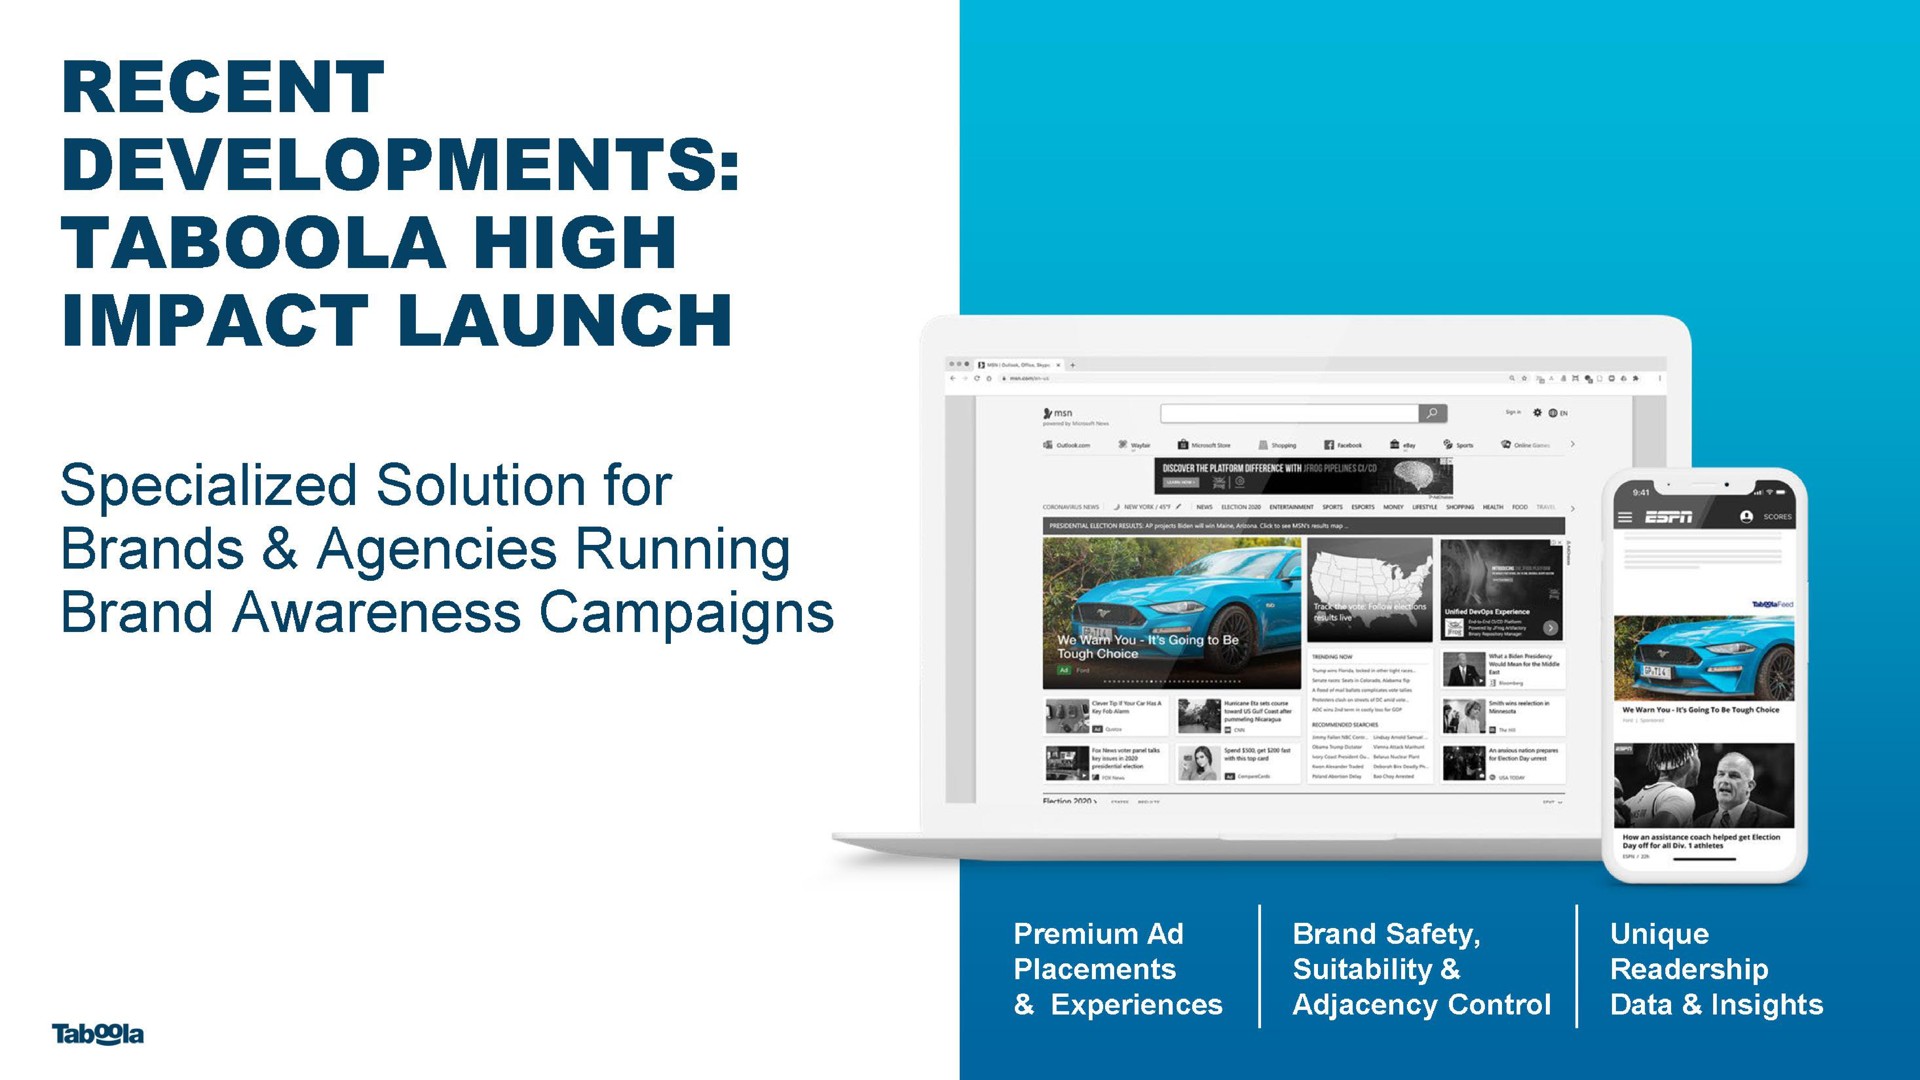 recent developments high impact launch specialized solution for brands agencies running brand awareness campaigns | Taboola